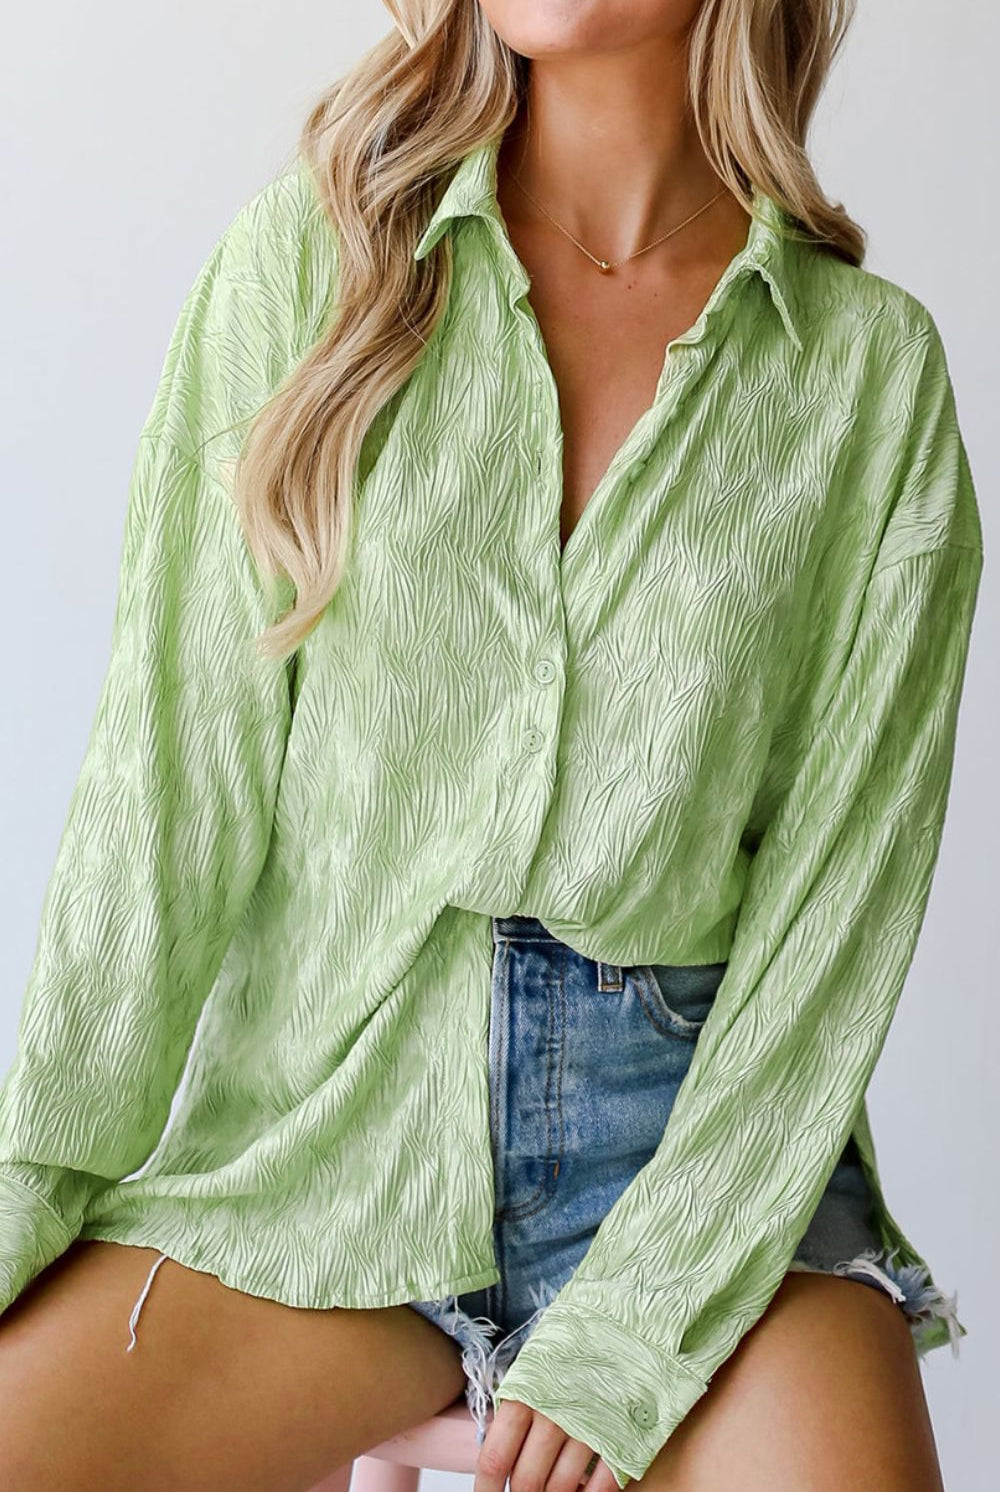 A light green, long-sleeve shirt with a distinctive textured pattern, offering a button-down front and a casual fit. Worn by a woman with blonde hair, it's styled with denim shorts, with the photo capturing from the waist up.